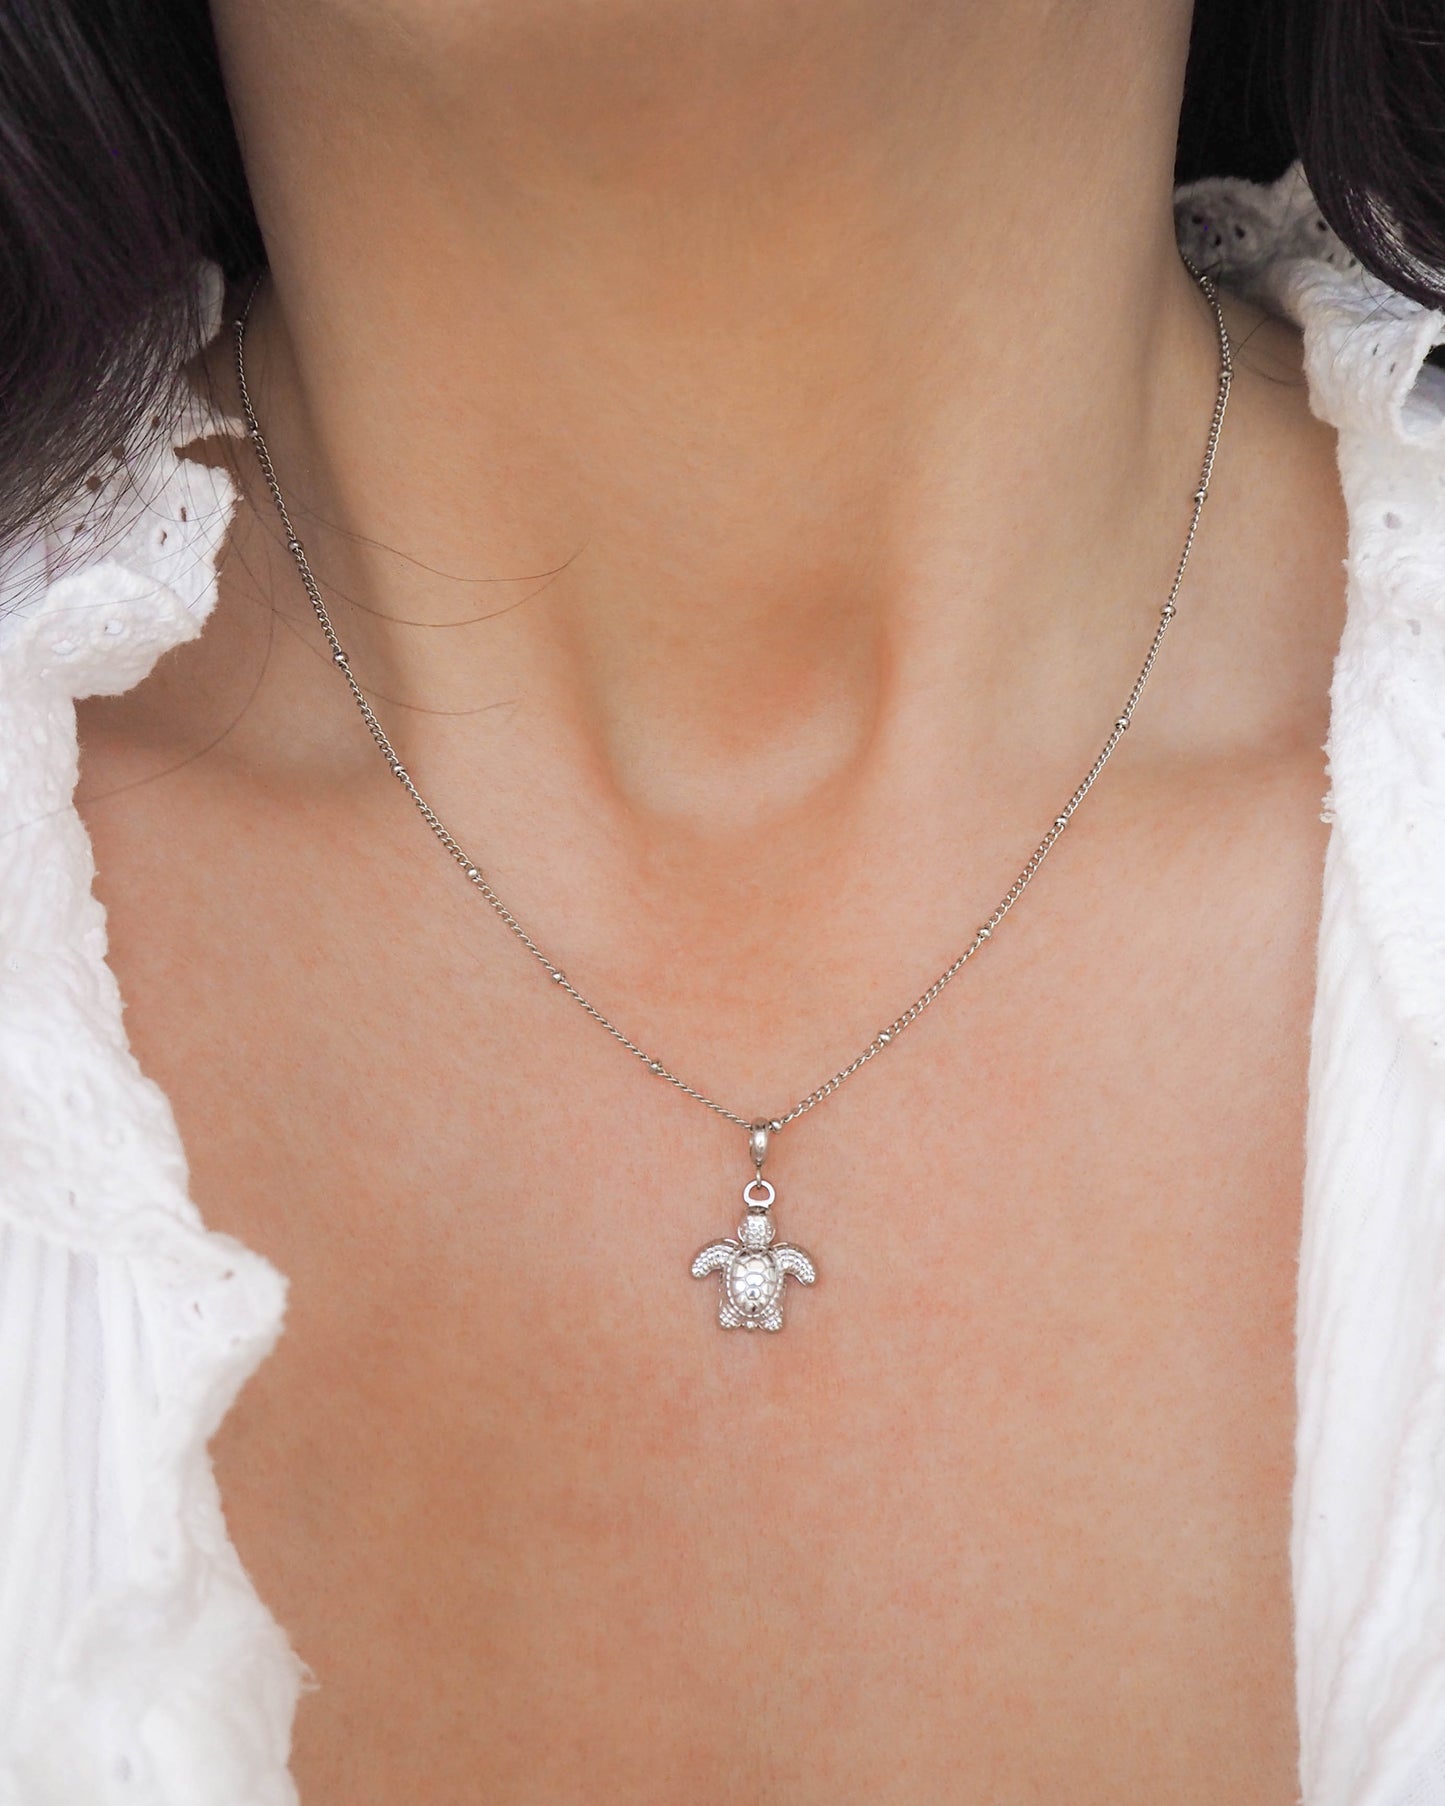 Model wearing Turtle Necklace made with Silver Stainless Steel